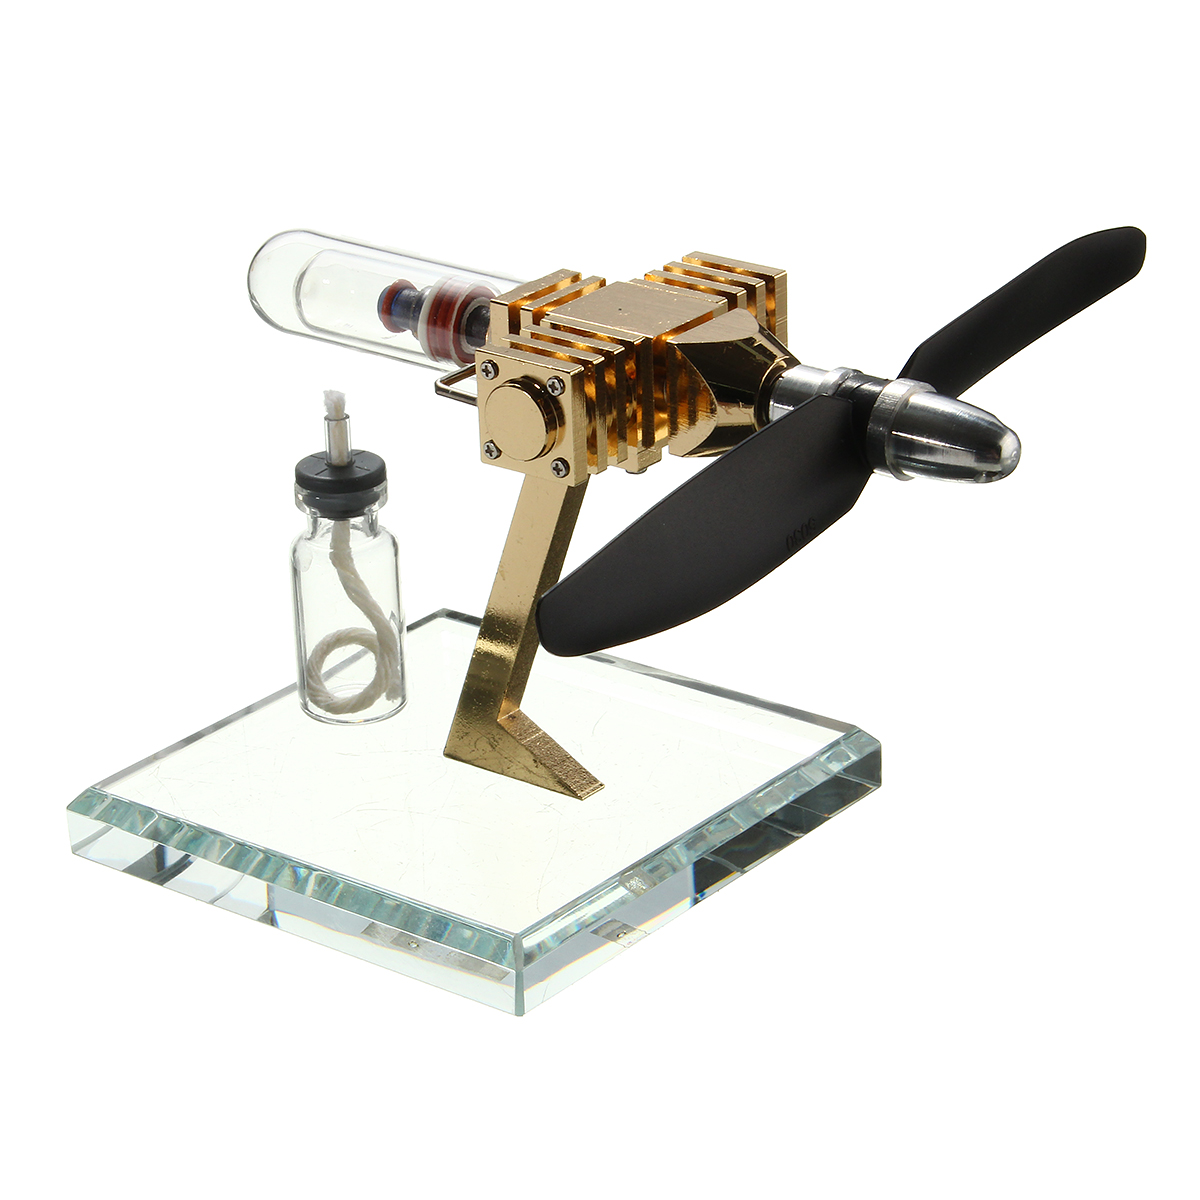 Aircraft-Hot-Air-Engine-Power-Generator-Engine-Innovative-Stirling-Engine-Science-Toys-New-Version-1099841